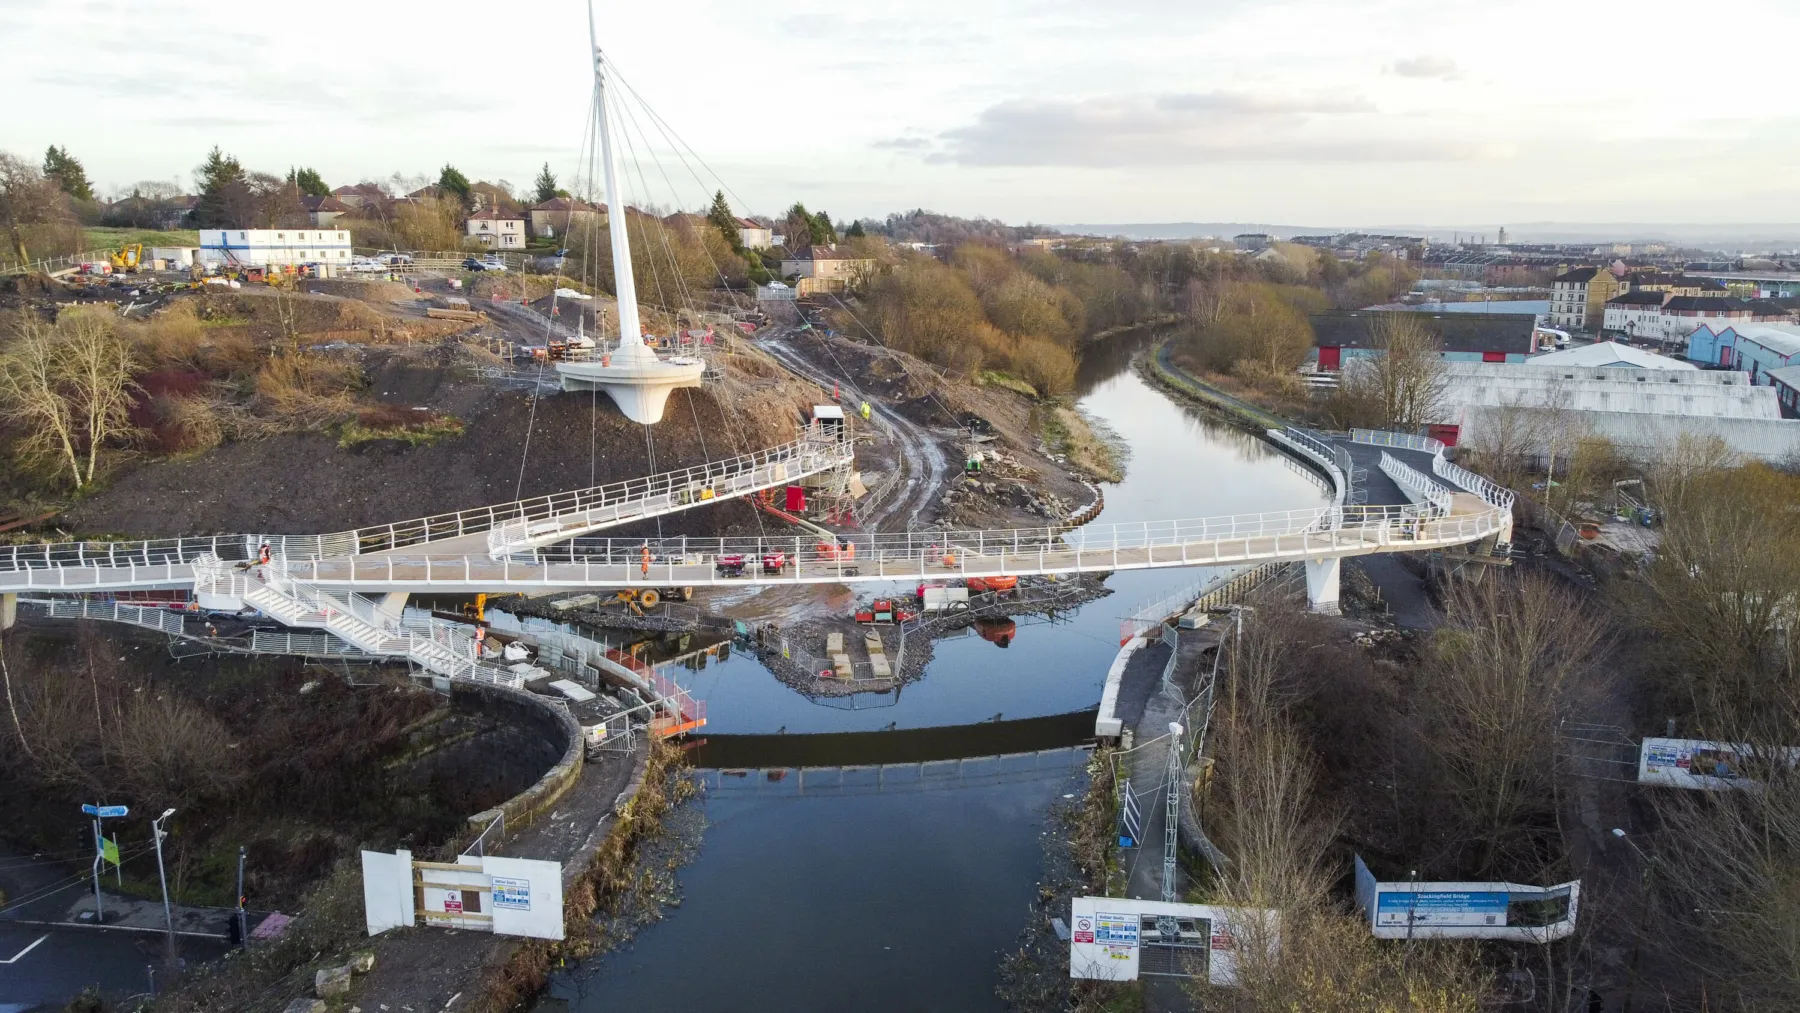 The construction of the Stockingfield Bridge across a junction of the Forth and Clyde Canal nears completion. Decks of the bridge are in place with cable stays from the tower.